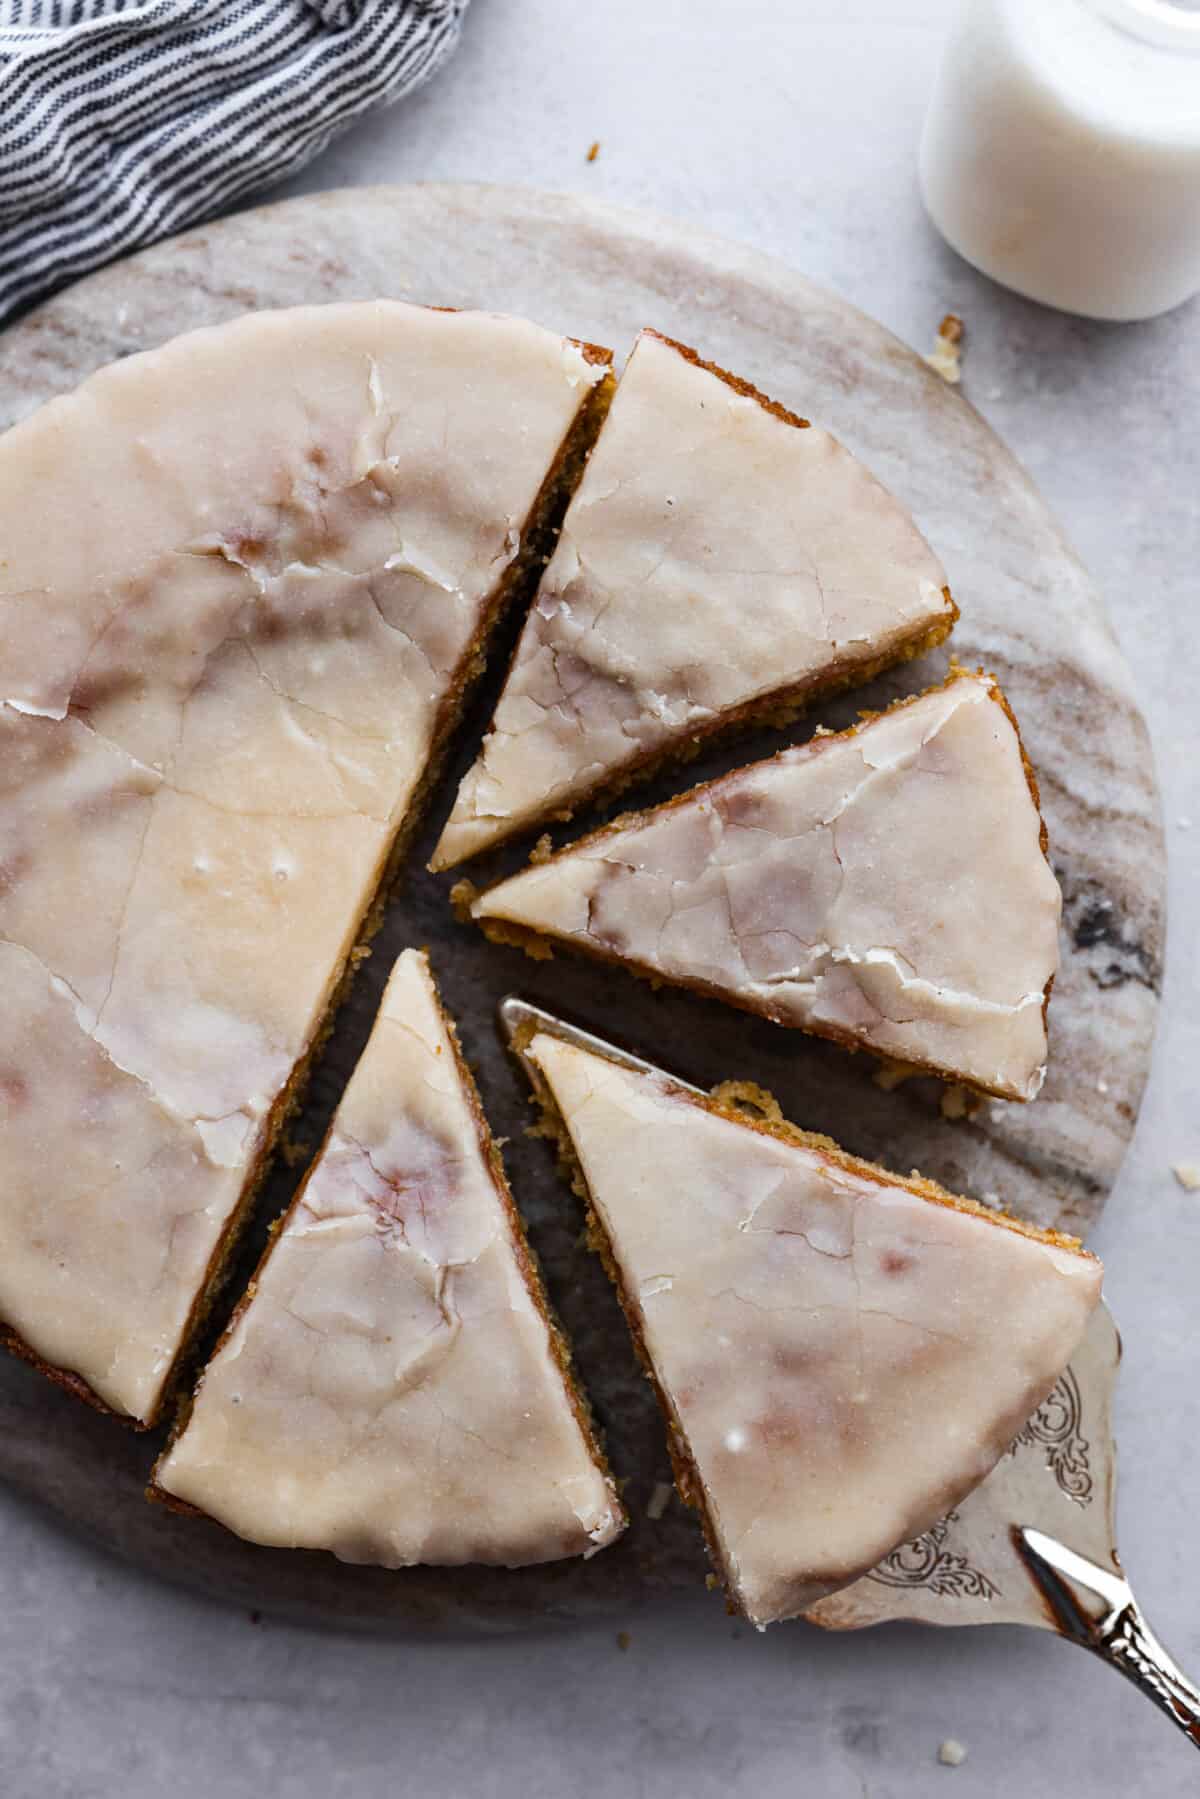 Top-down view of buttermilk cake, cut into slices.